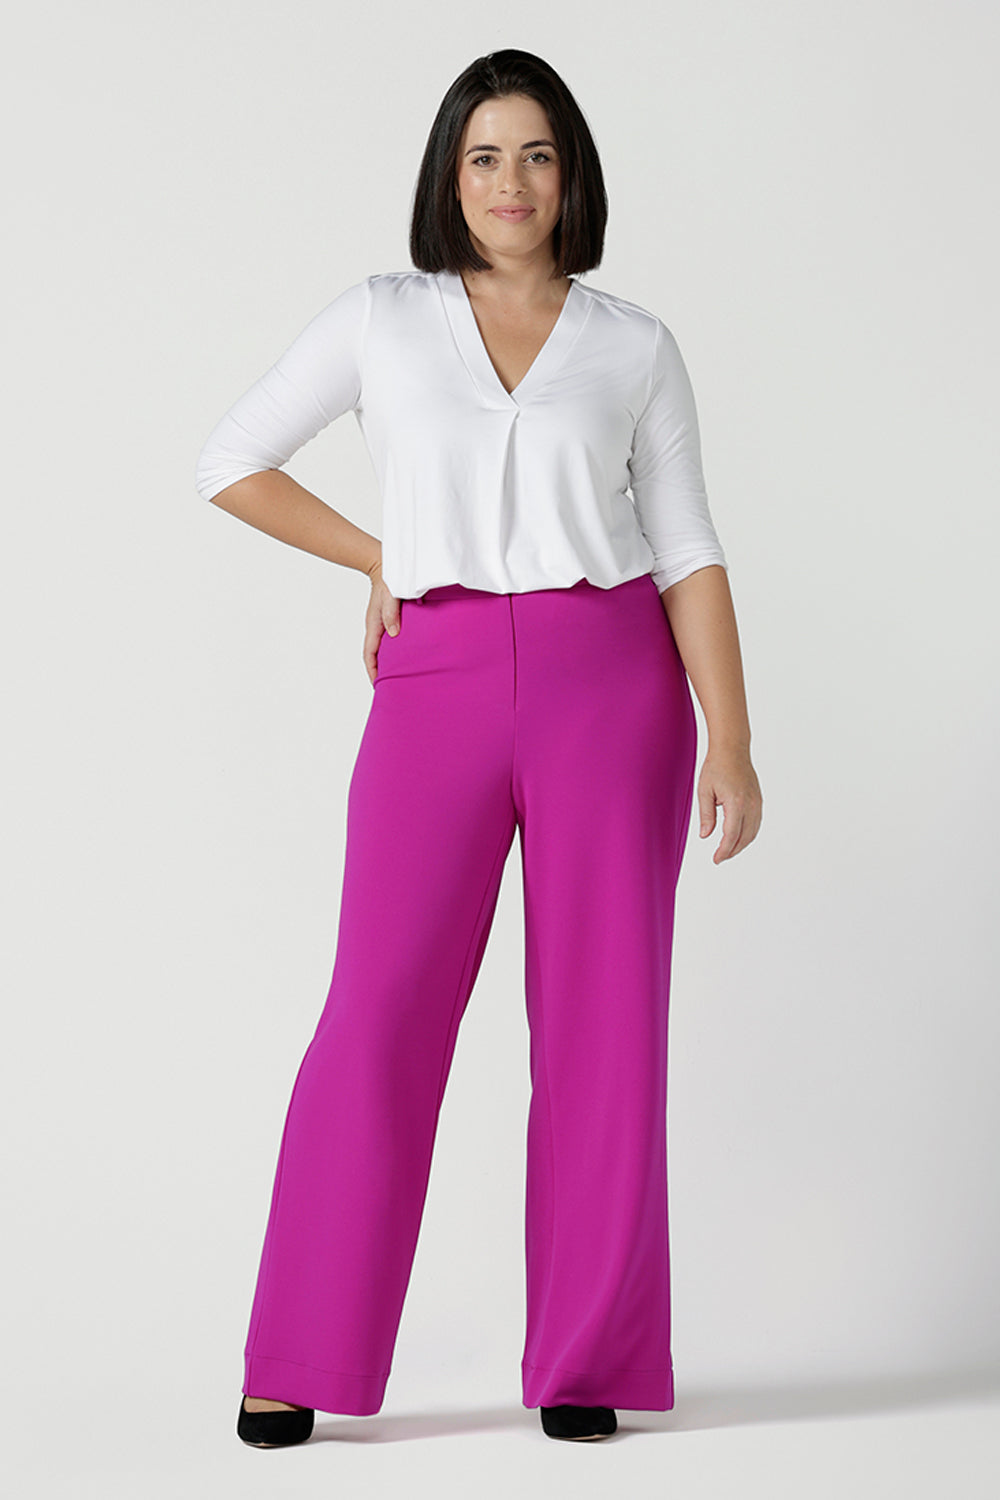 Size 10 Woman wears the Drew Pant in Fuchsia. A high waist tailored pant with matching suit blazer. Made in Australia for women size 8 - 24.